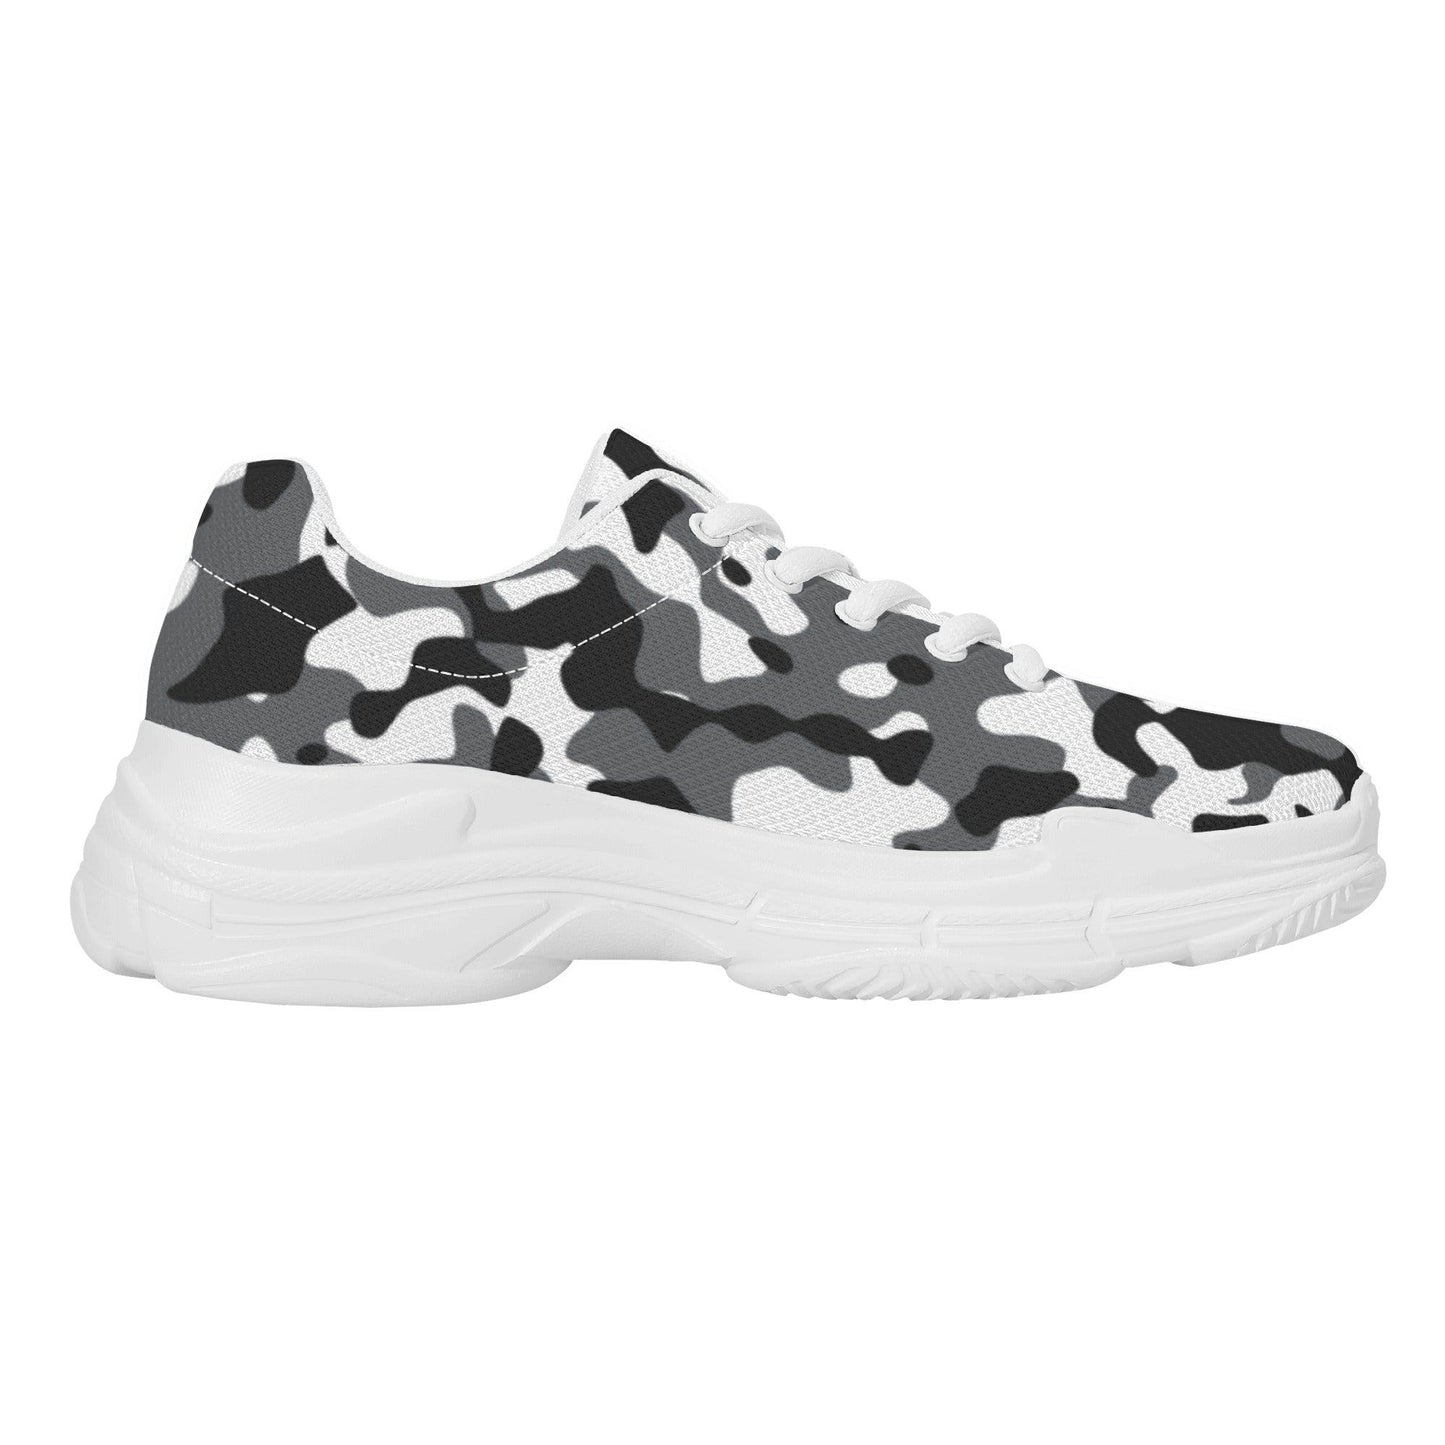 Black Camouflage Chunky Sneakers Schuhe 79.99 Black, Camouflage, Chunky, Herren, Schuhe JLR Design